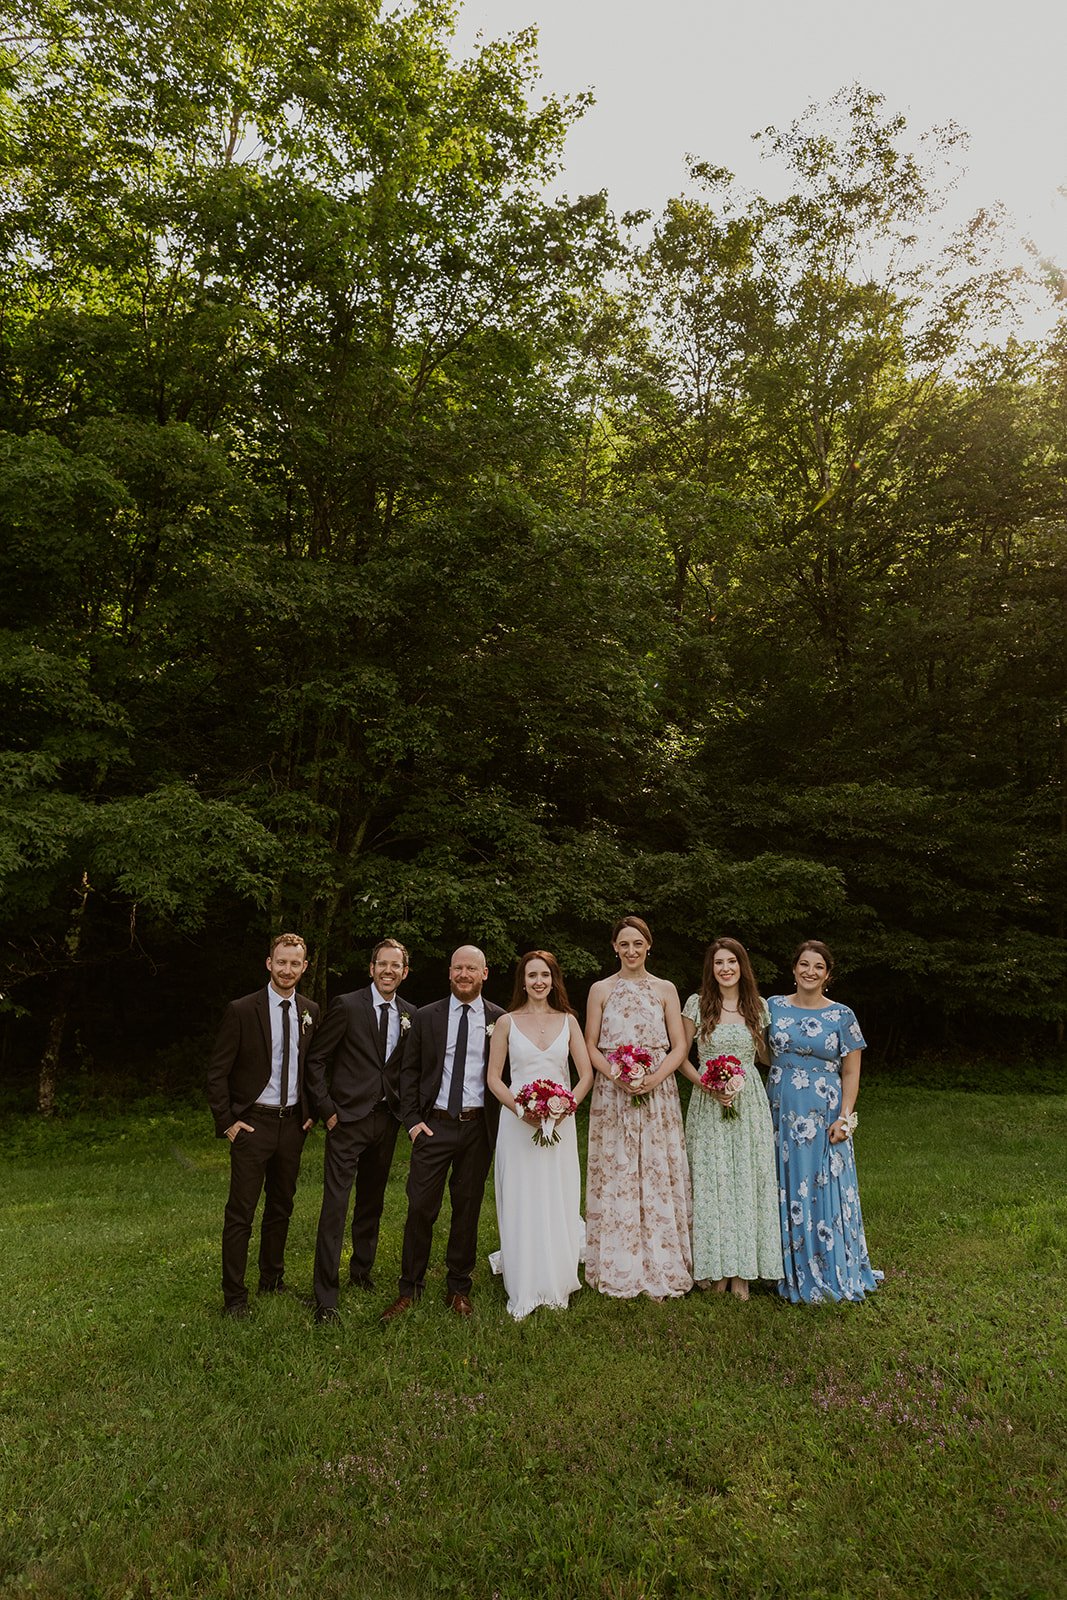 Bridal party pose as a group together with a beautiful green backdrop.